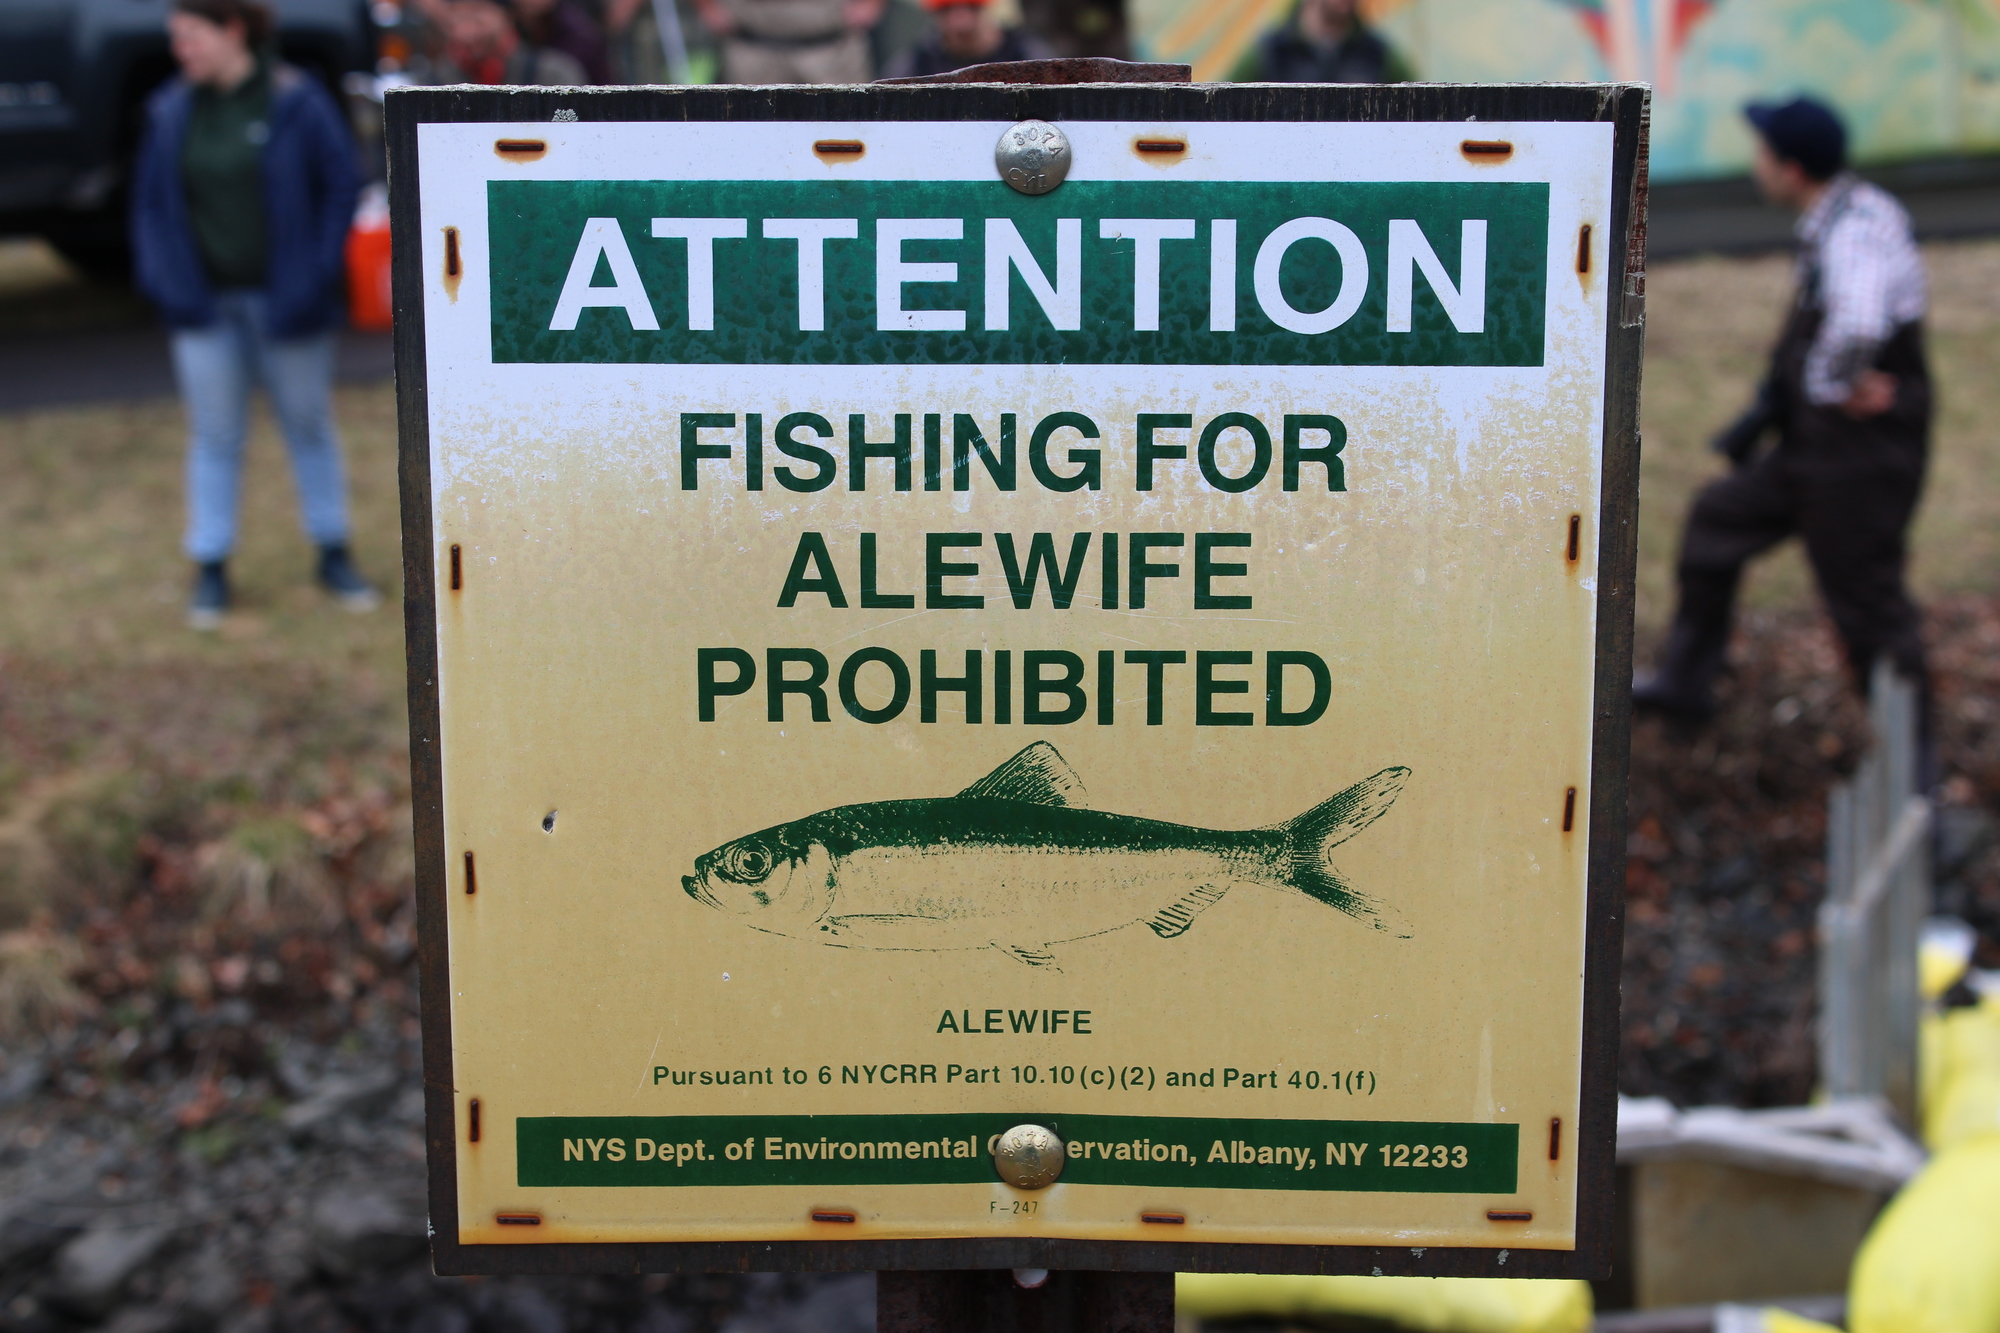 https://content.govdelivery.com/attachments/fancy_images/NYSDEC/2022/11/6677562/fishing-for-alewife-prohibited-signage_original.jpg